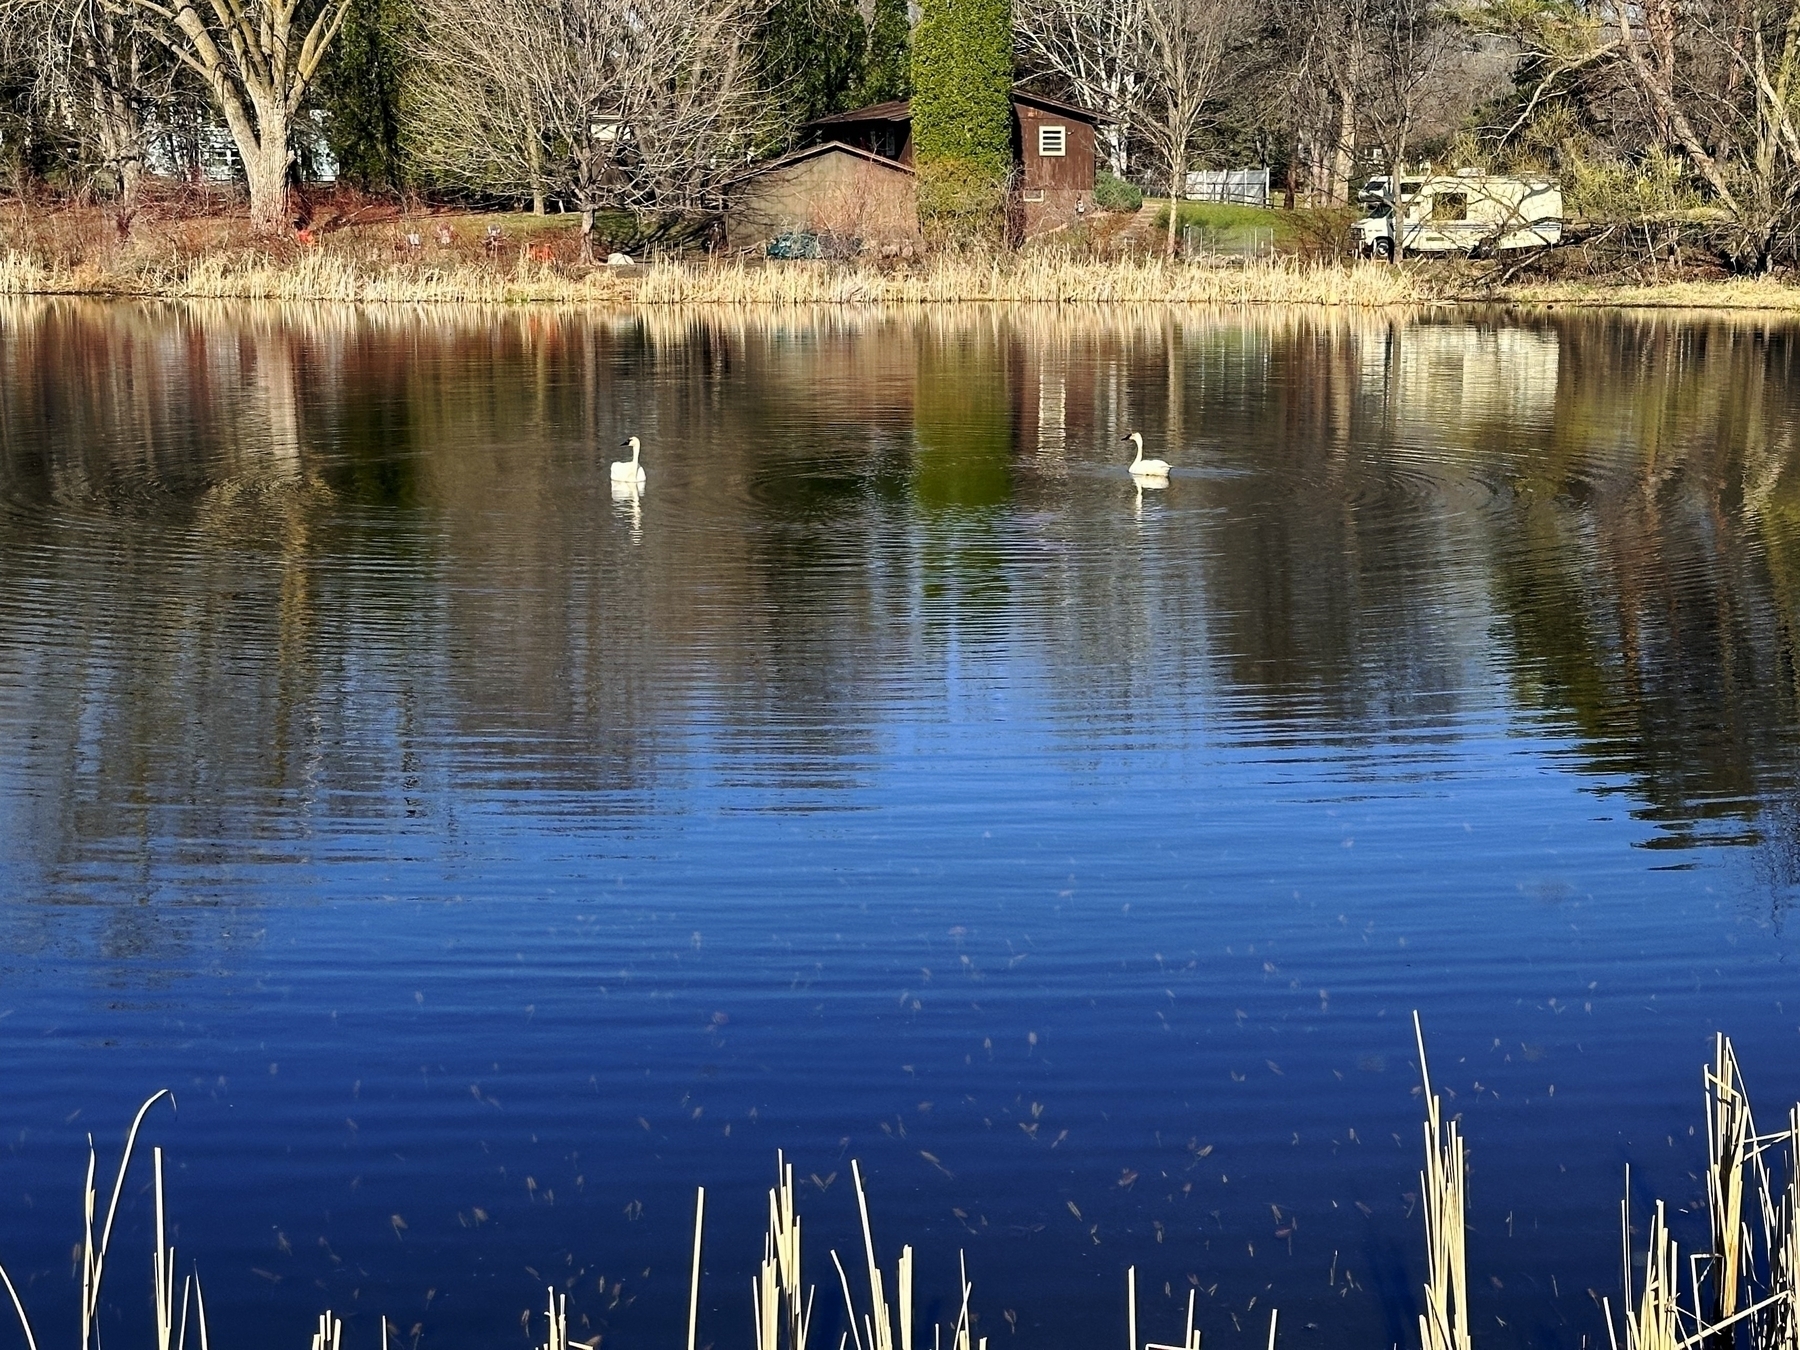 Two swans are swimming on a reflective pond surrounded by trees and reeds with buildings in the background.